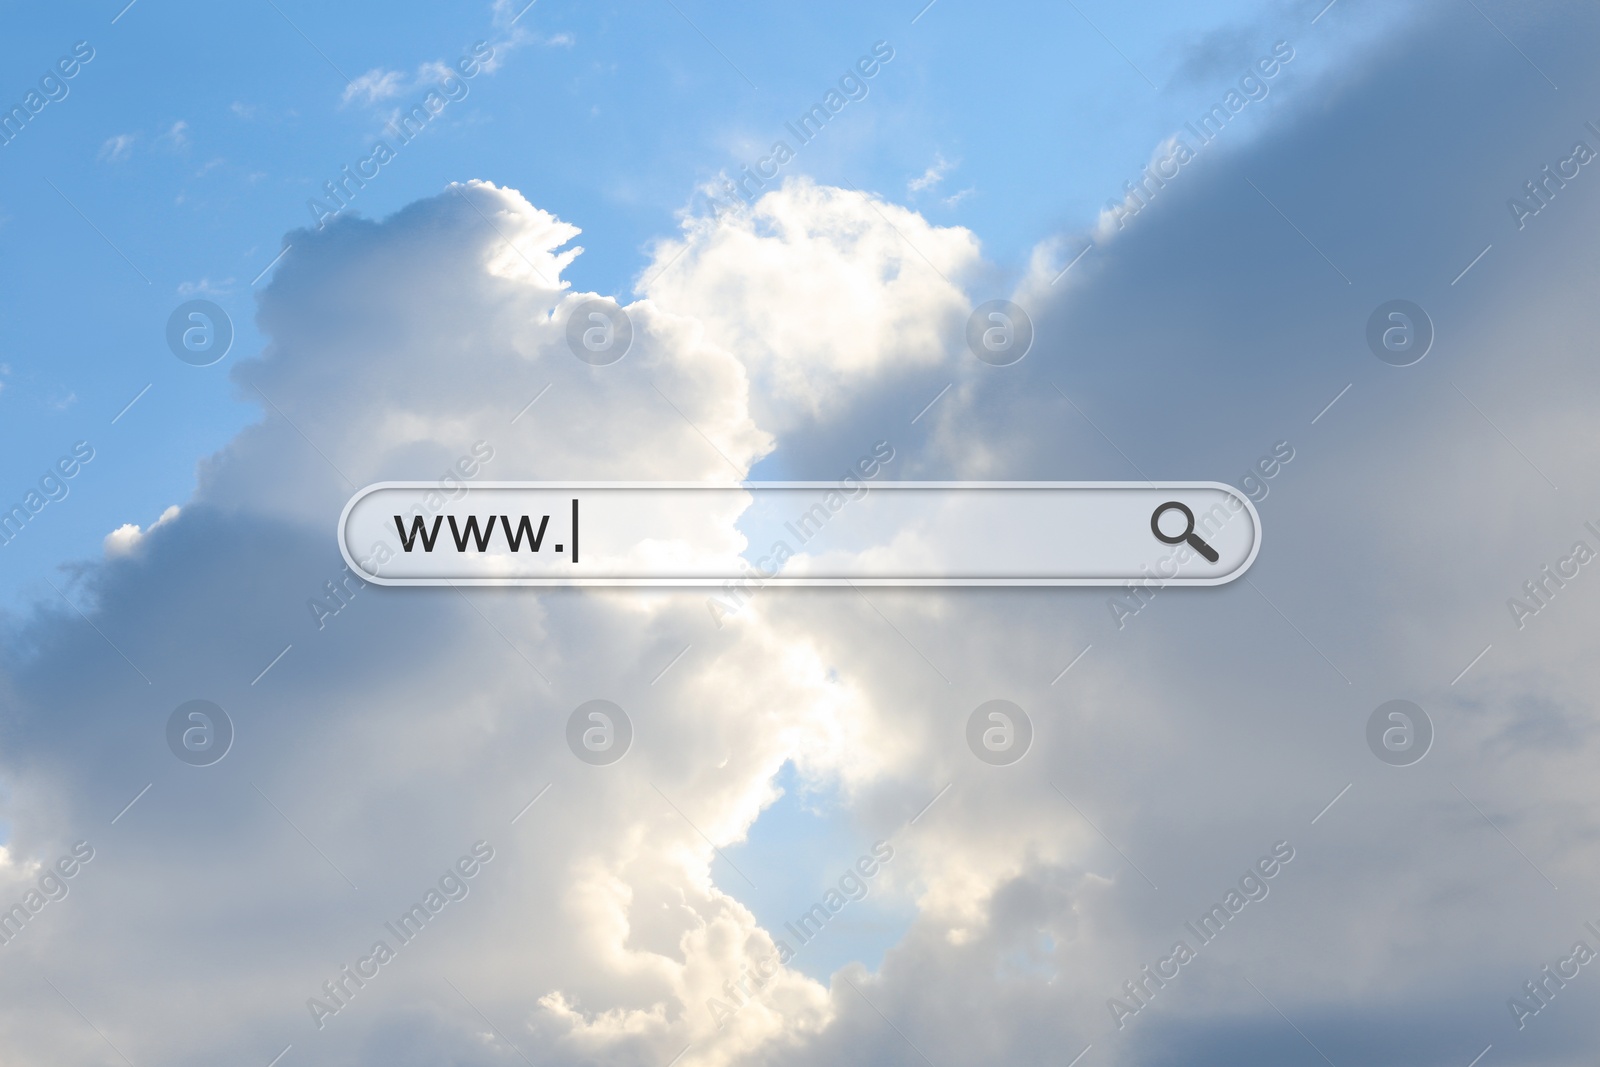 Image of Search bar and cloudy sky on background